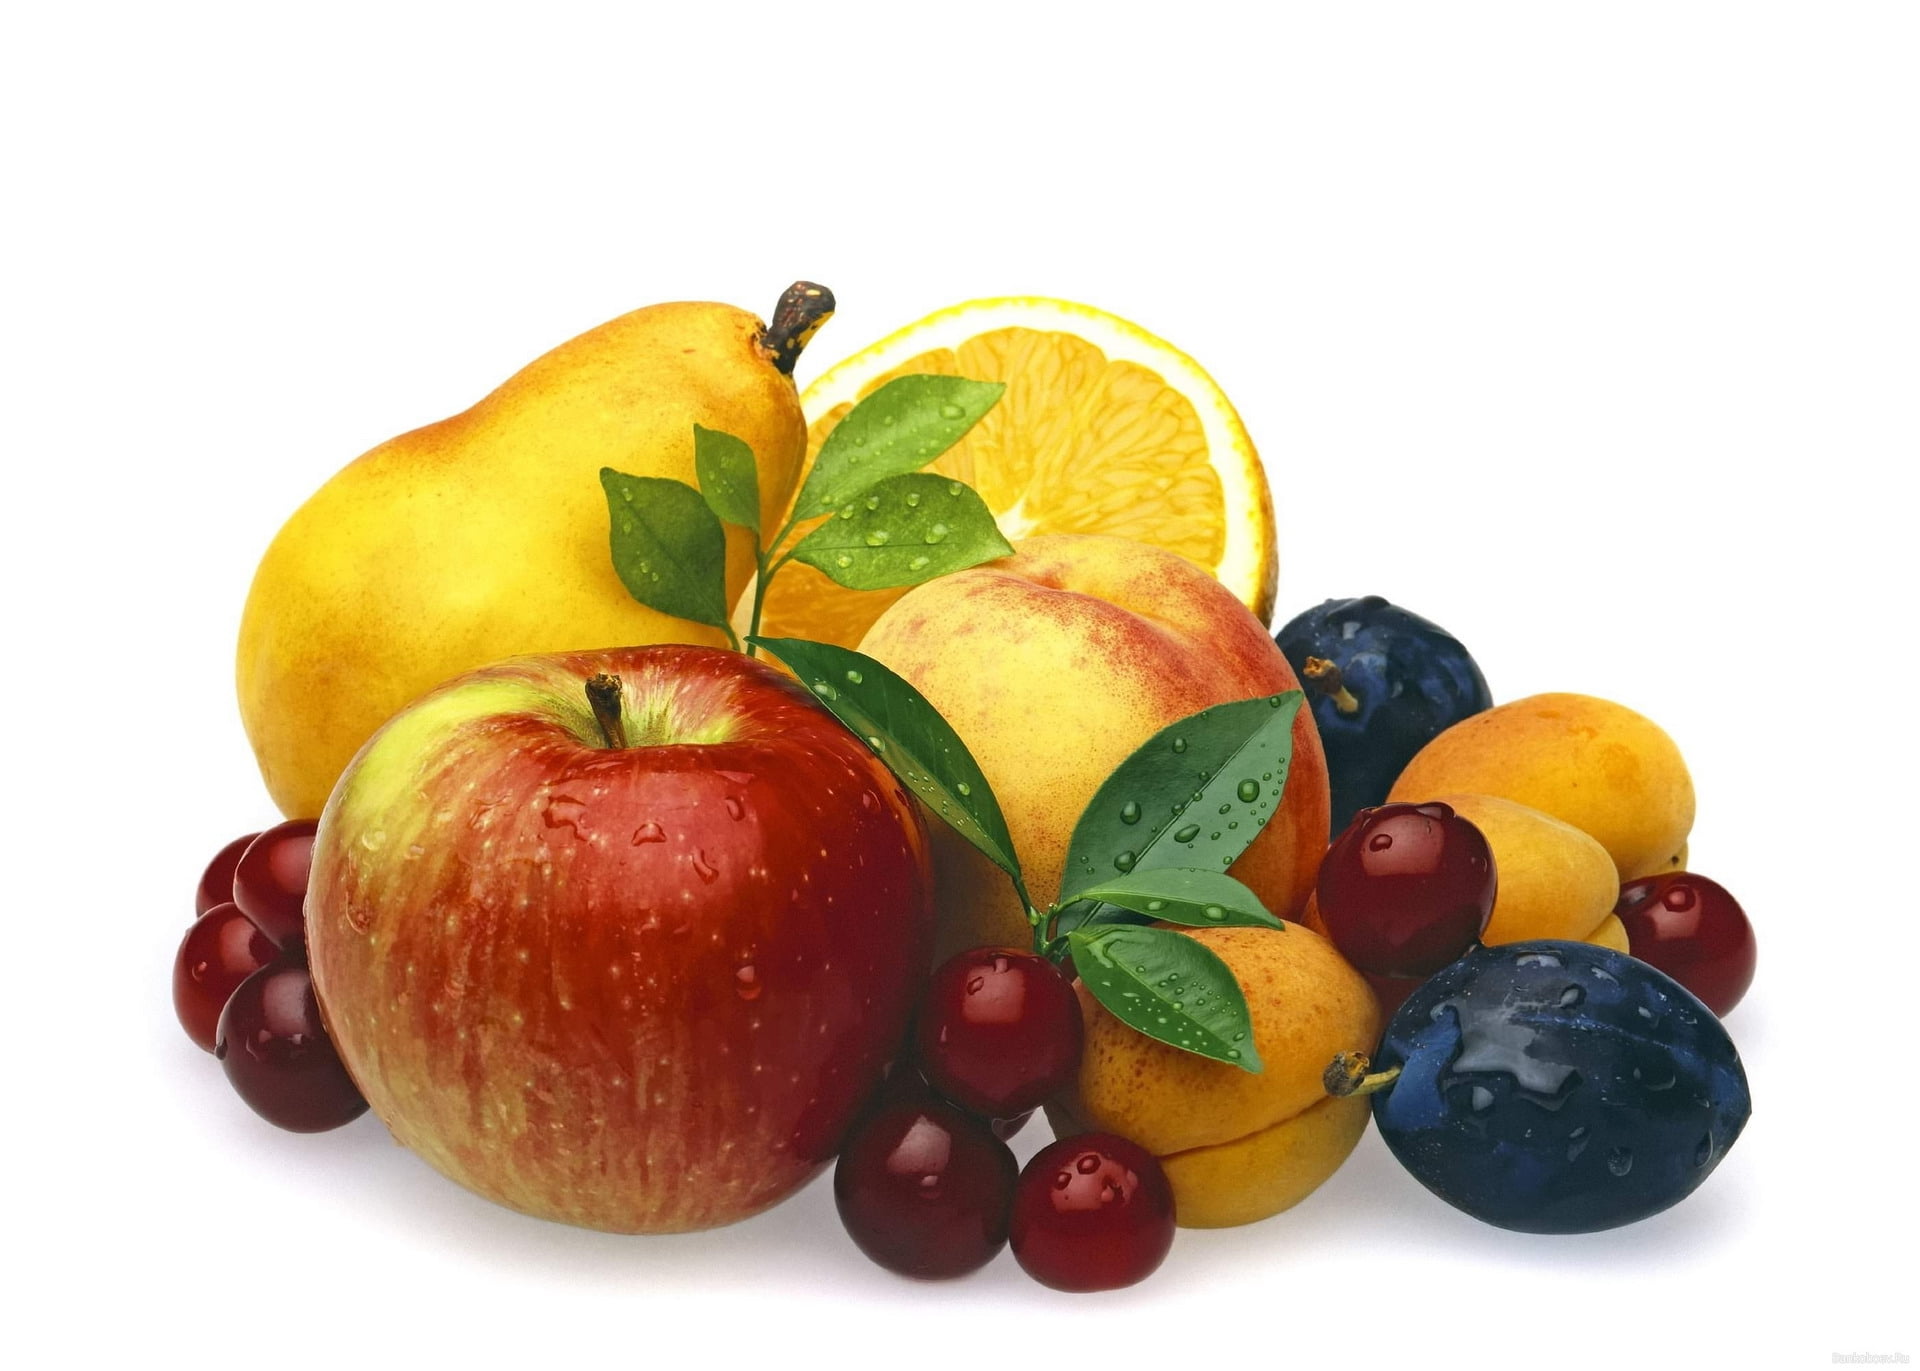 red apple, apples, pears, grapes, plums, oranges, healthy eating